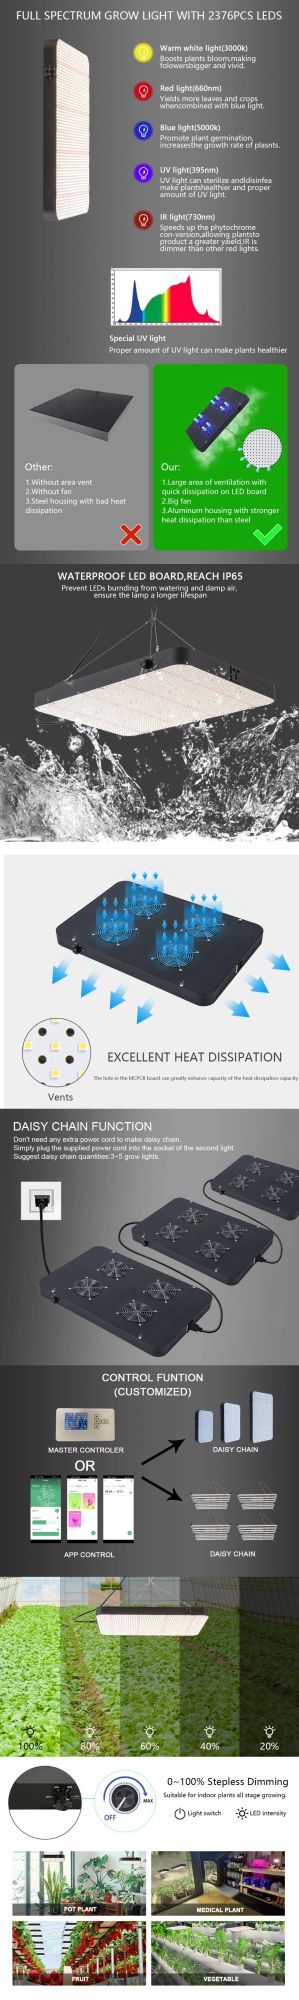 1000W Daisy Chain Group Control Hydroponic Indoor Seeding Veg and Bloom Greenhouse Growing Plant Panel LED Grow Light Quantum Board with FCC Certificate